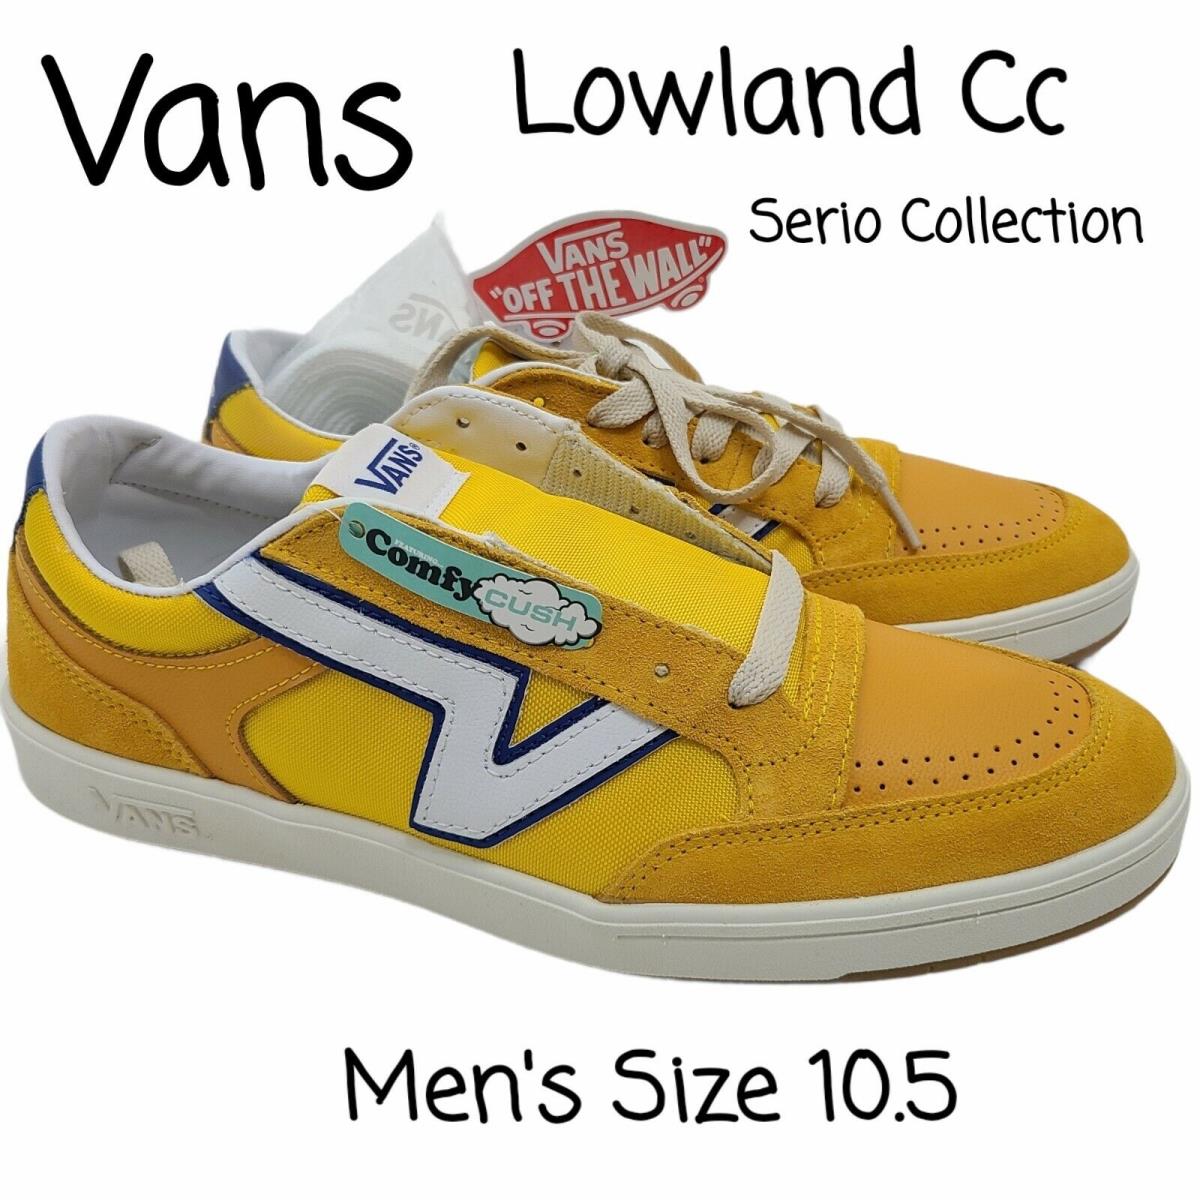 Vans Yellow Blue Serio Collection Lowland CC Shoes Extra Laces Mens Size 10.5